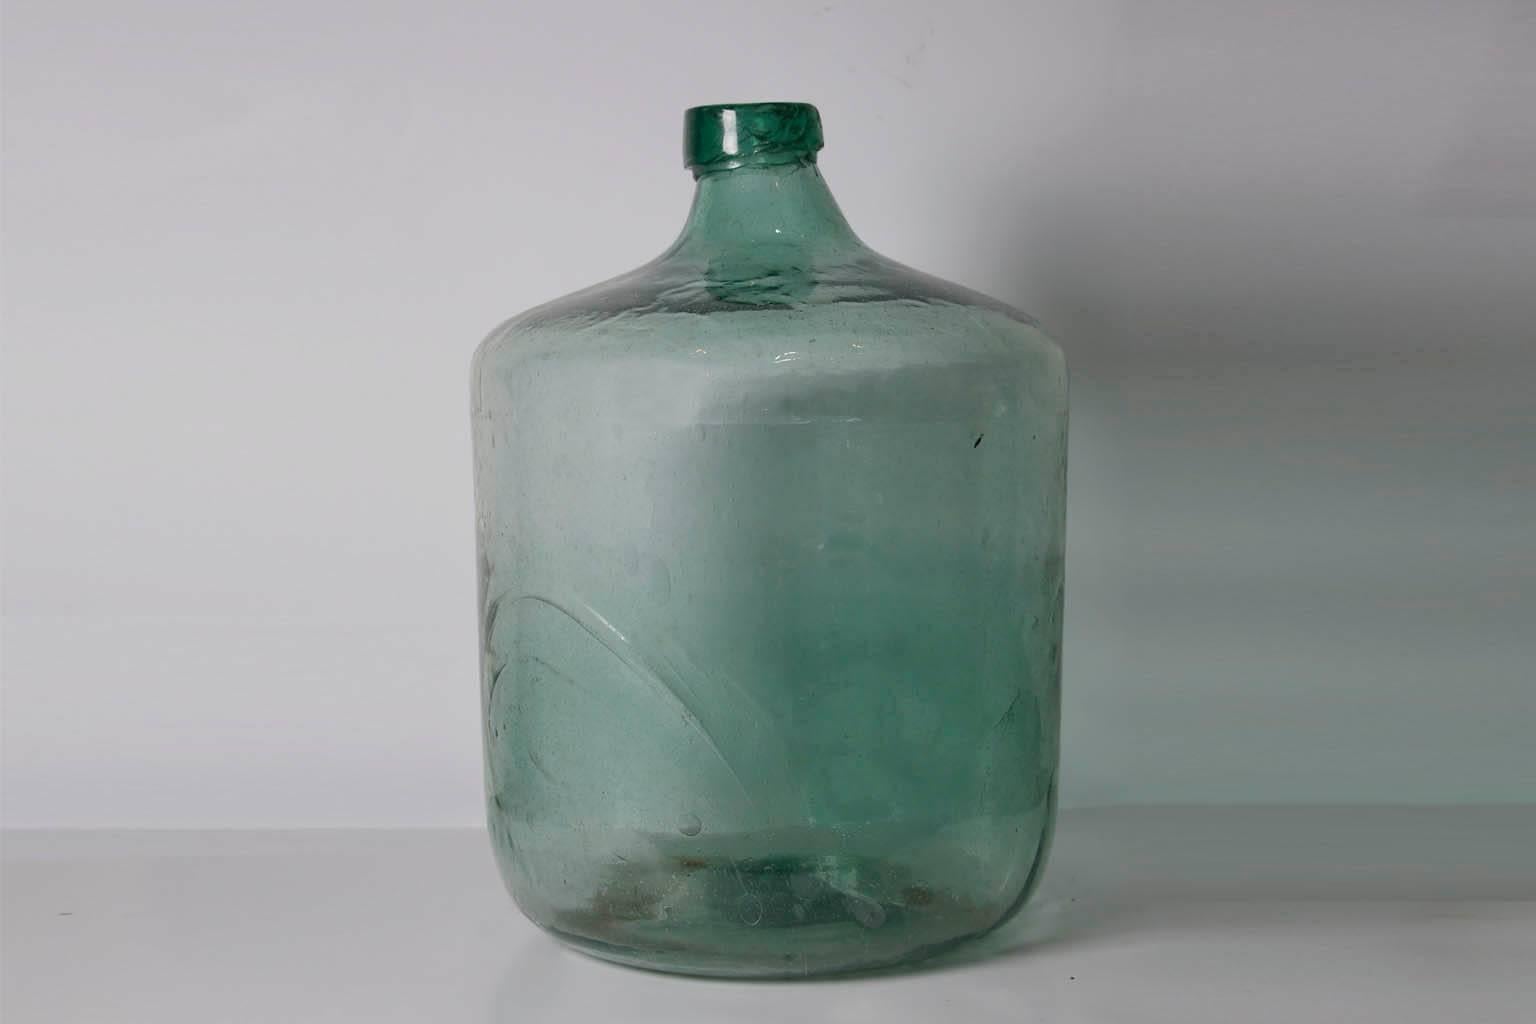 This 20th century (1930-1940) green handblown glass Demijohn from the state of Oaxaca Mexico was used to store Mezcal.
Excellent conditions can carry up to 50 liters.